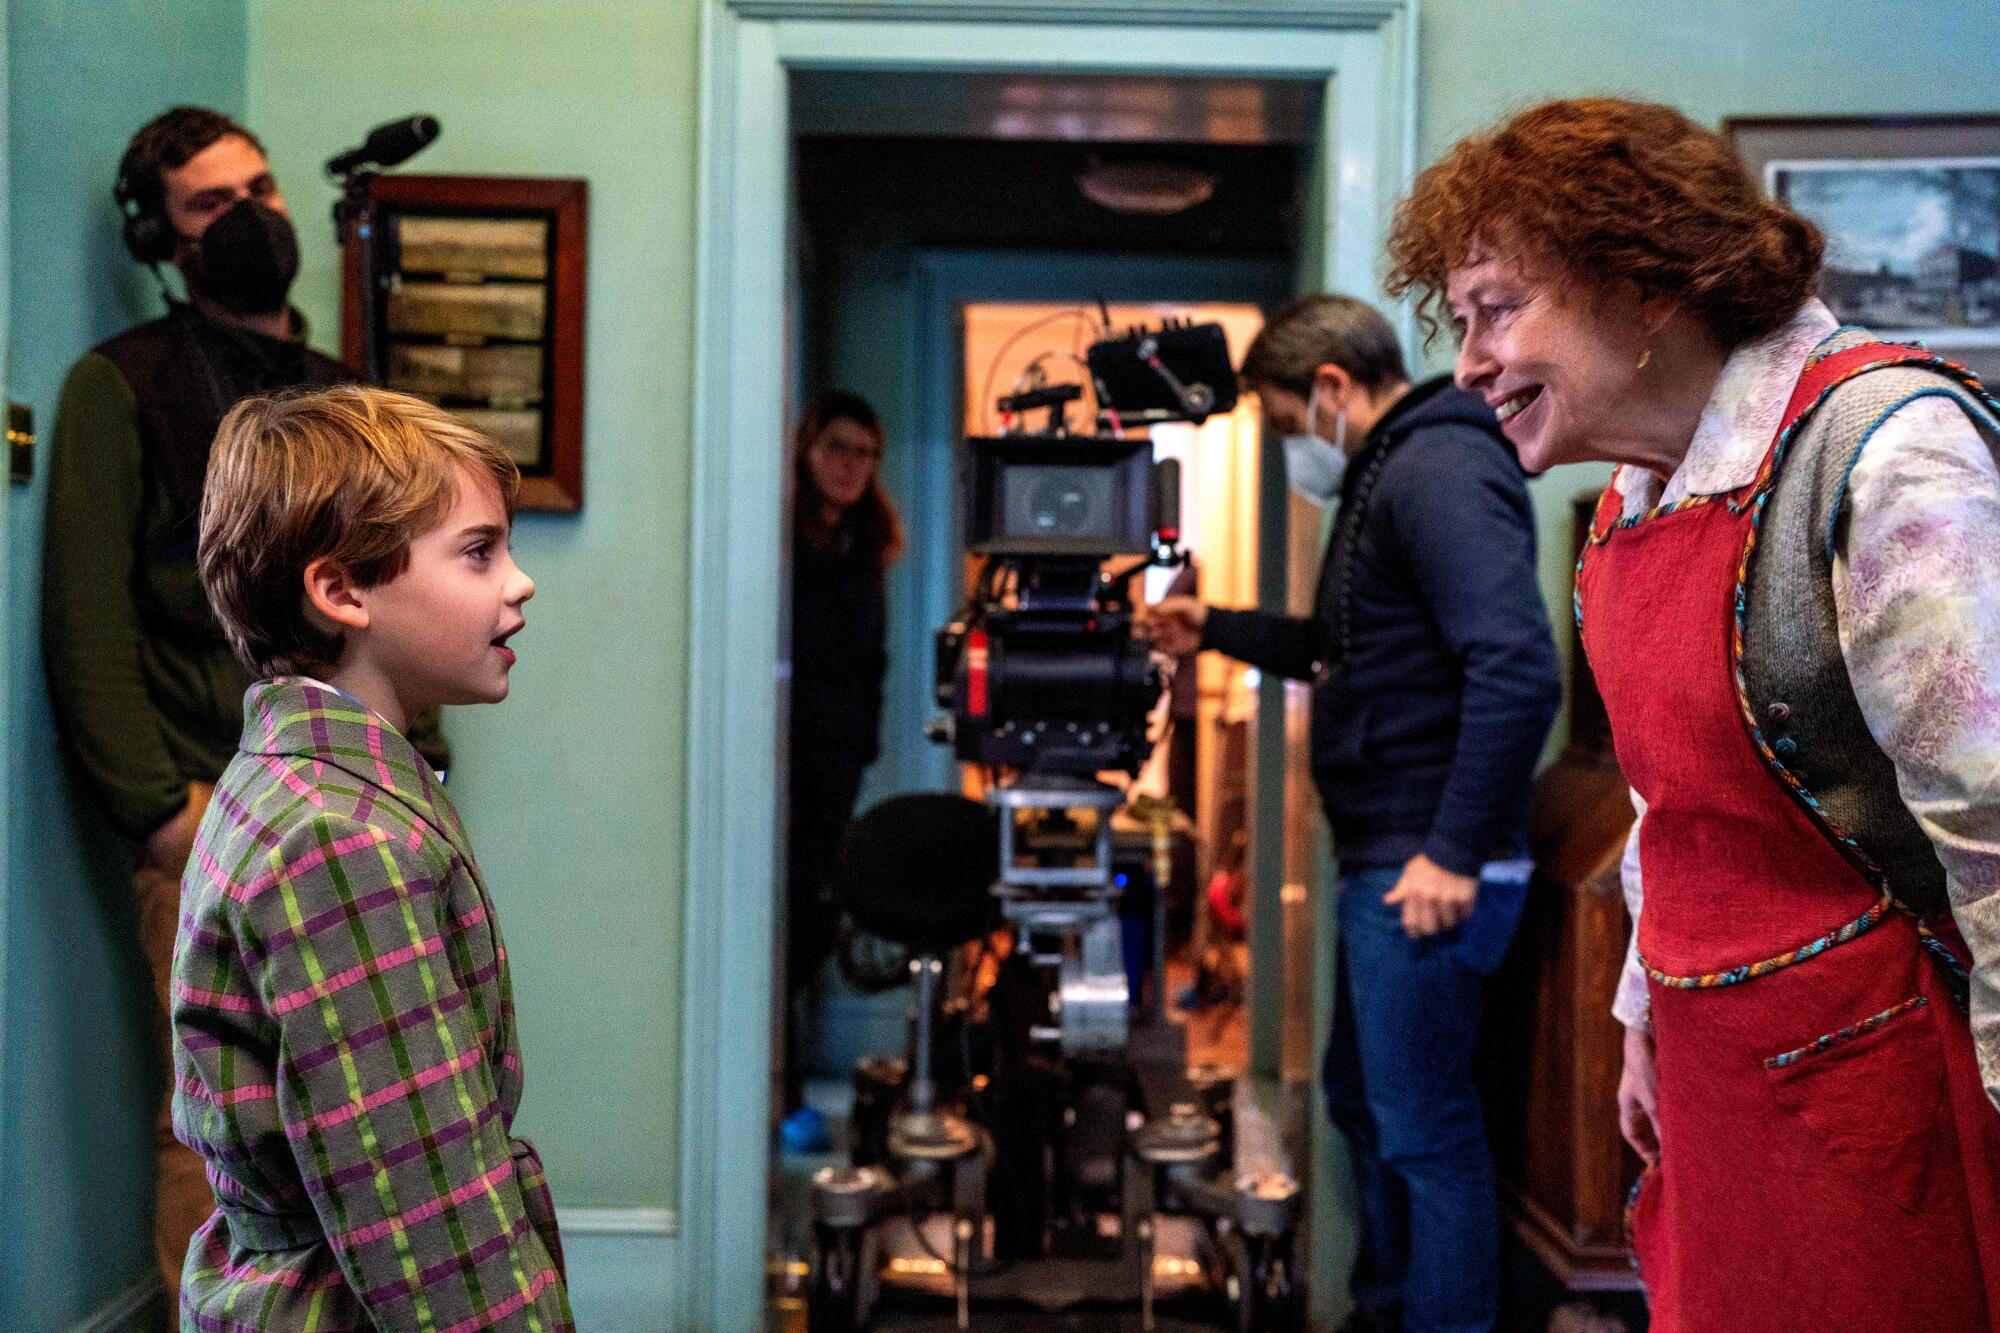 A boy looks at a woman on a set with cameras and production staff looking at them.